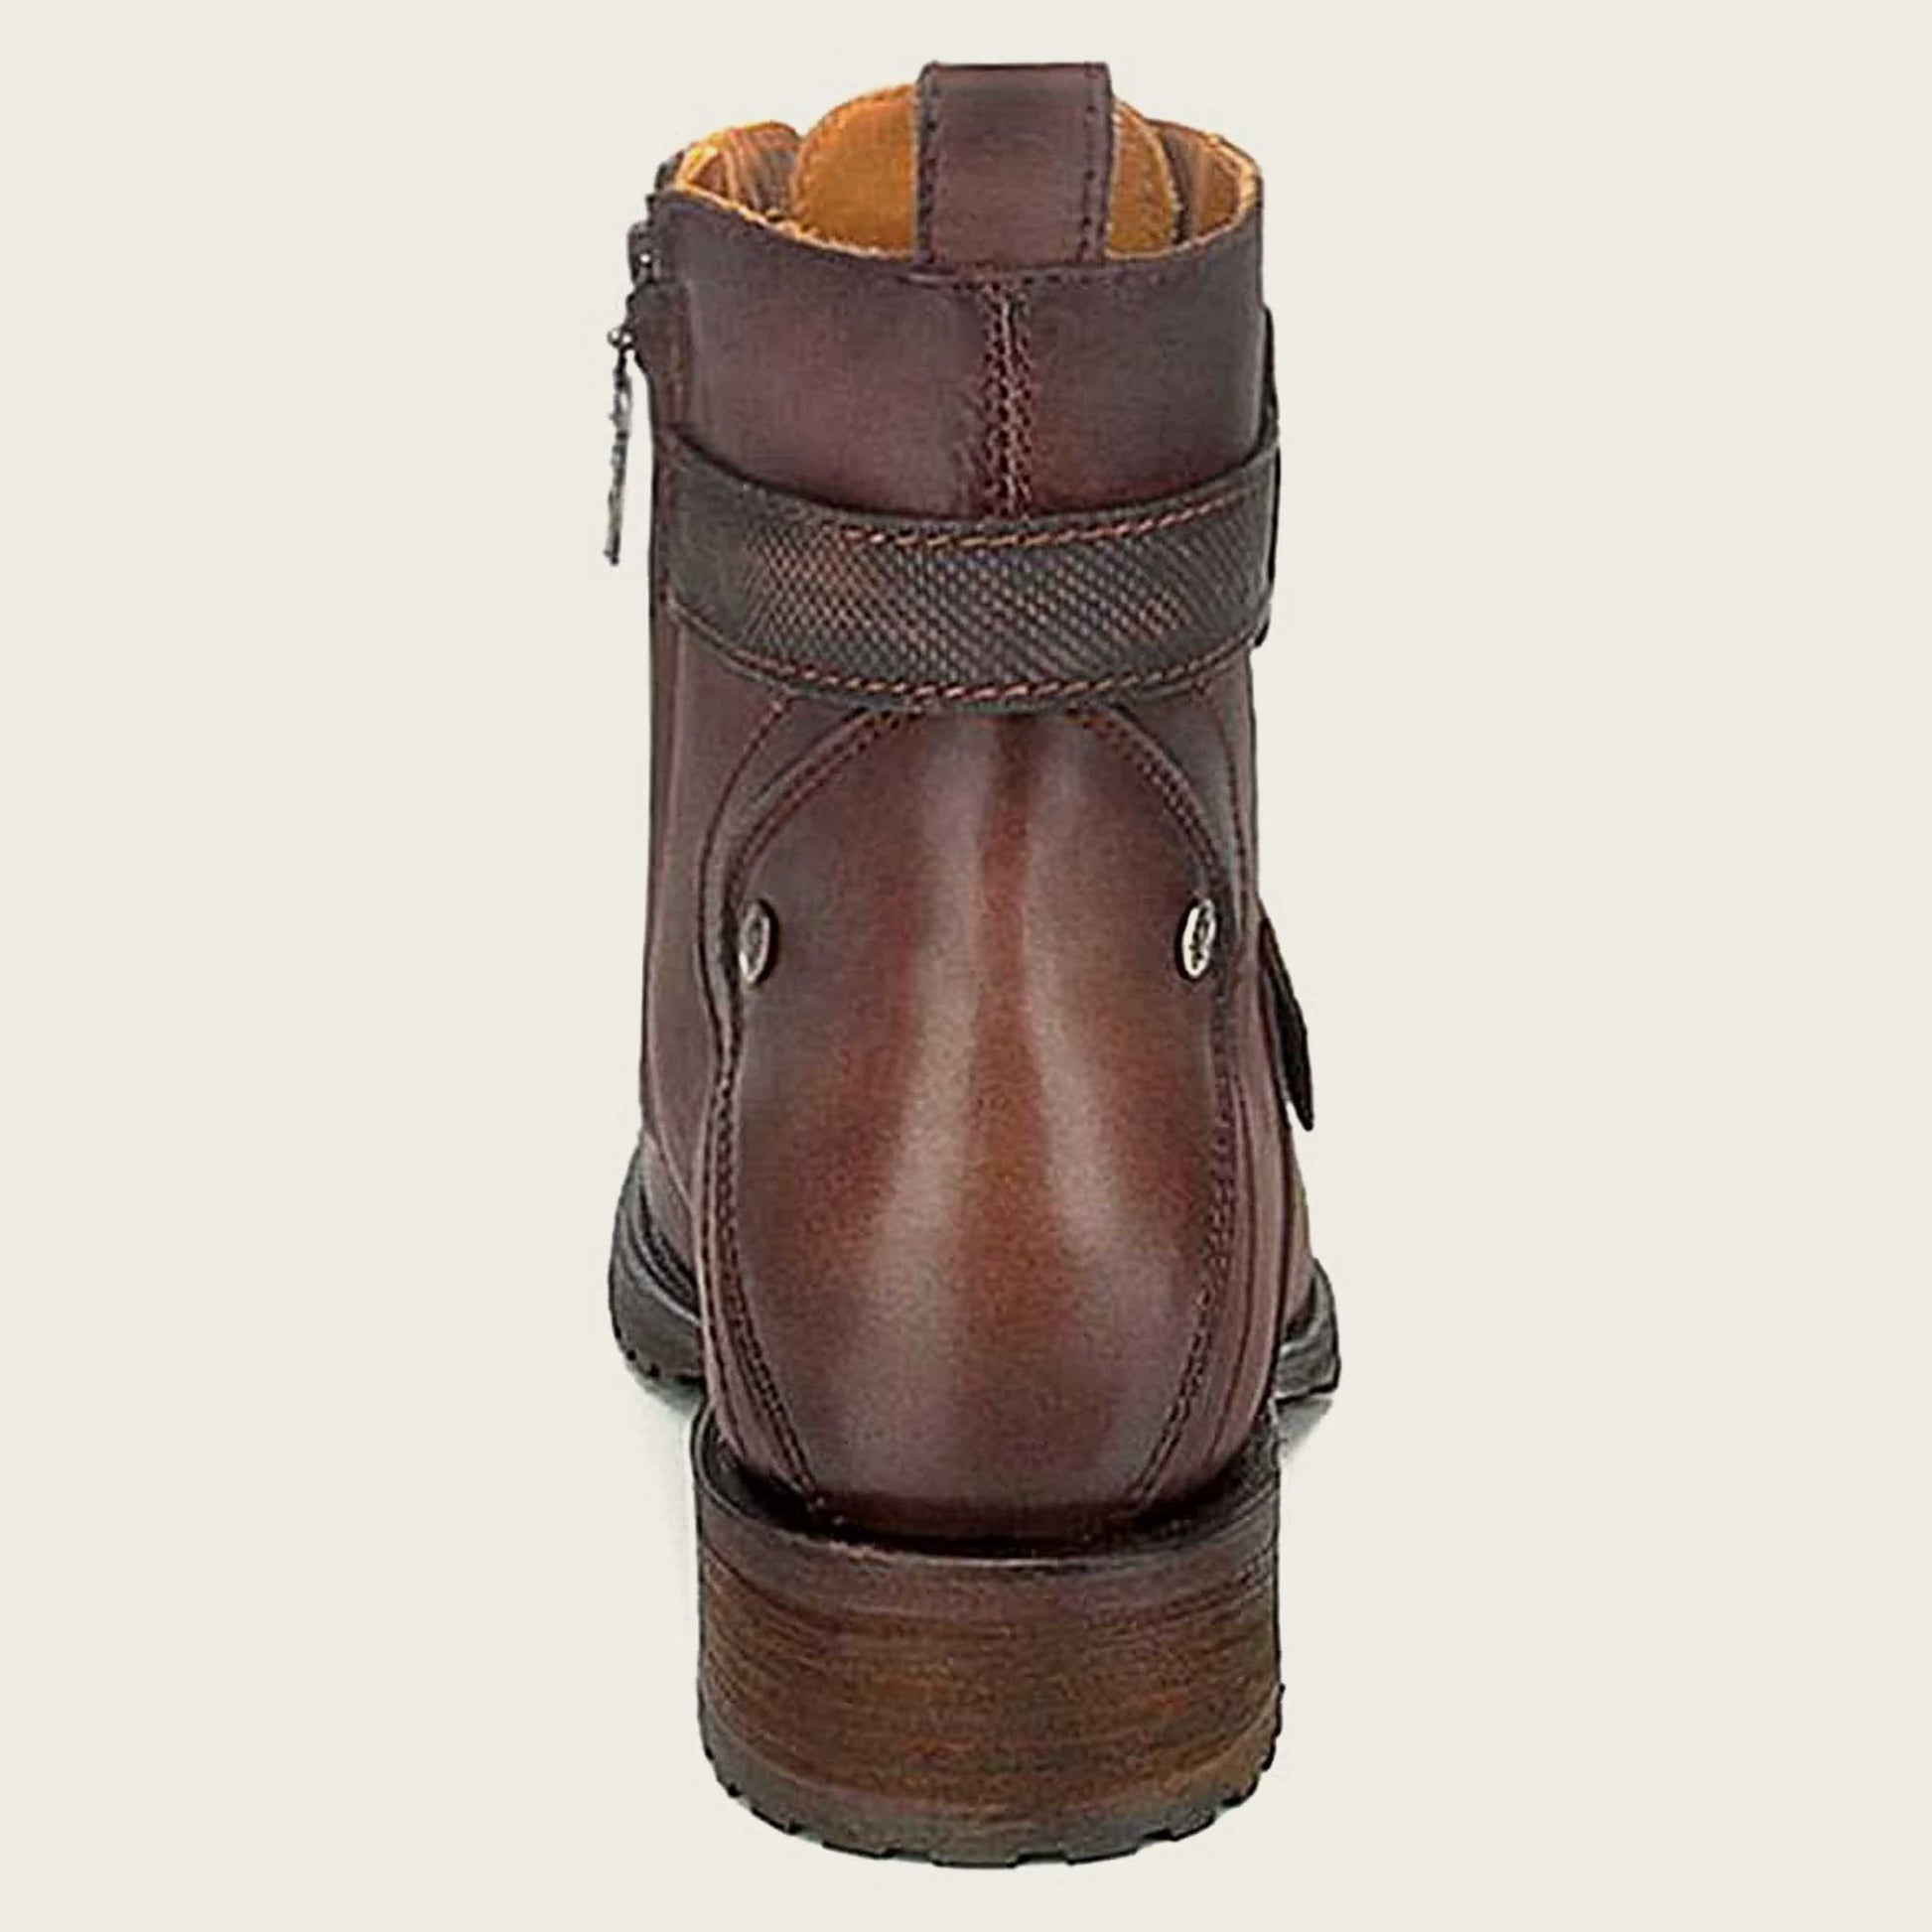 hand painted brown boots